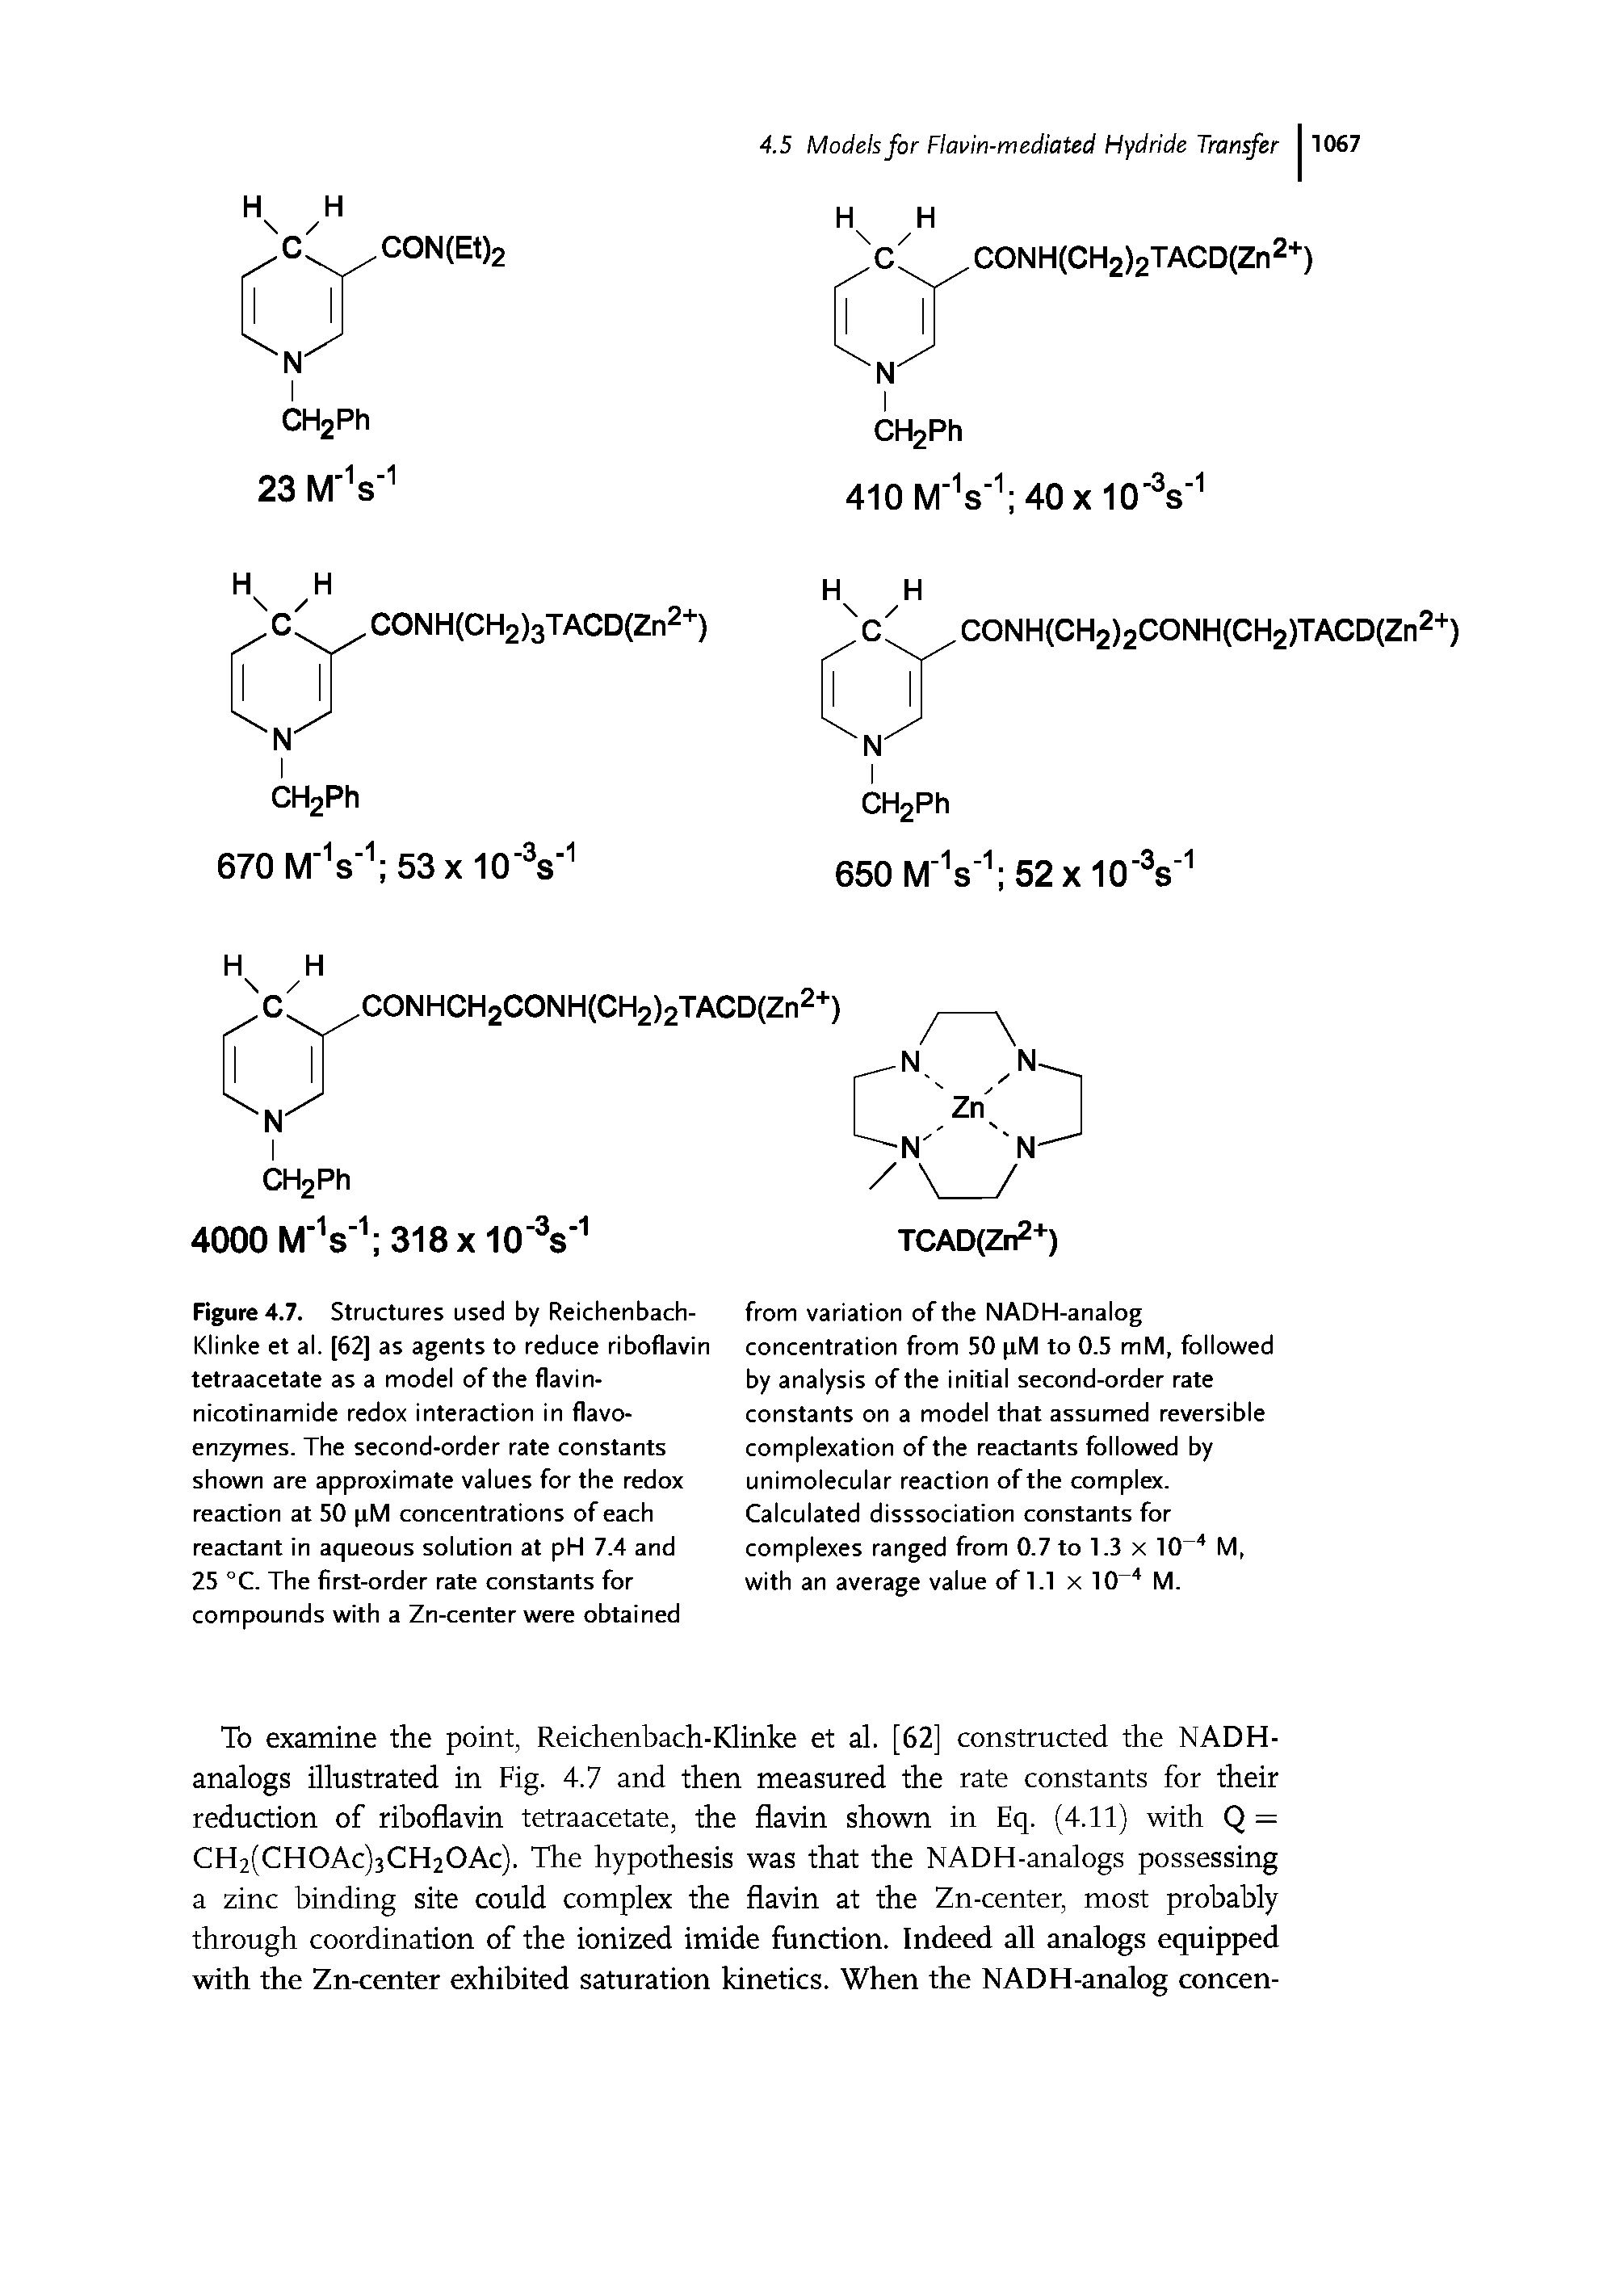 Figure 4.7. Structures used by Reichenbach-Klinke et al. [62] as agents to reduce riboflavin tetraacetate as a model of the flavin-nicotinamide redox interaction in flavo-enzymes. The second-order rate constants shown are approximate values for the redox reaction at 50 pM concentrations of each reactant in aqueous solution at pH 7.4 and 25 °C. The first-order rate constants for compounds with a Zn-center were obtained...